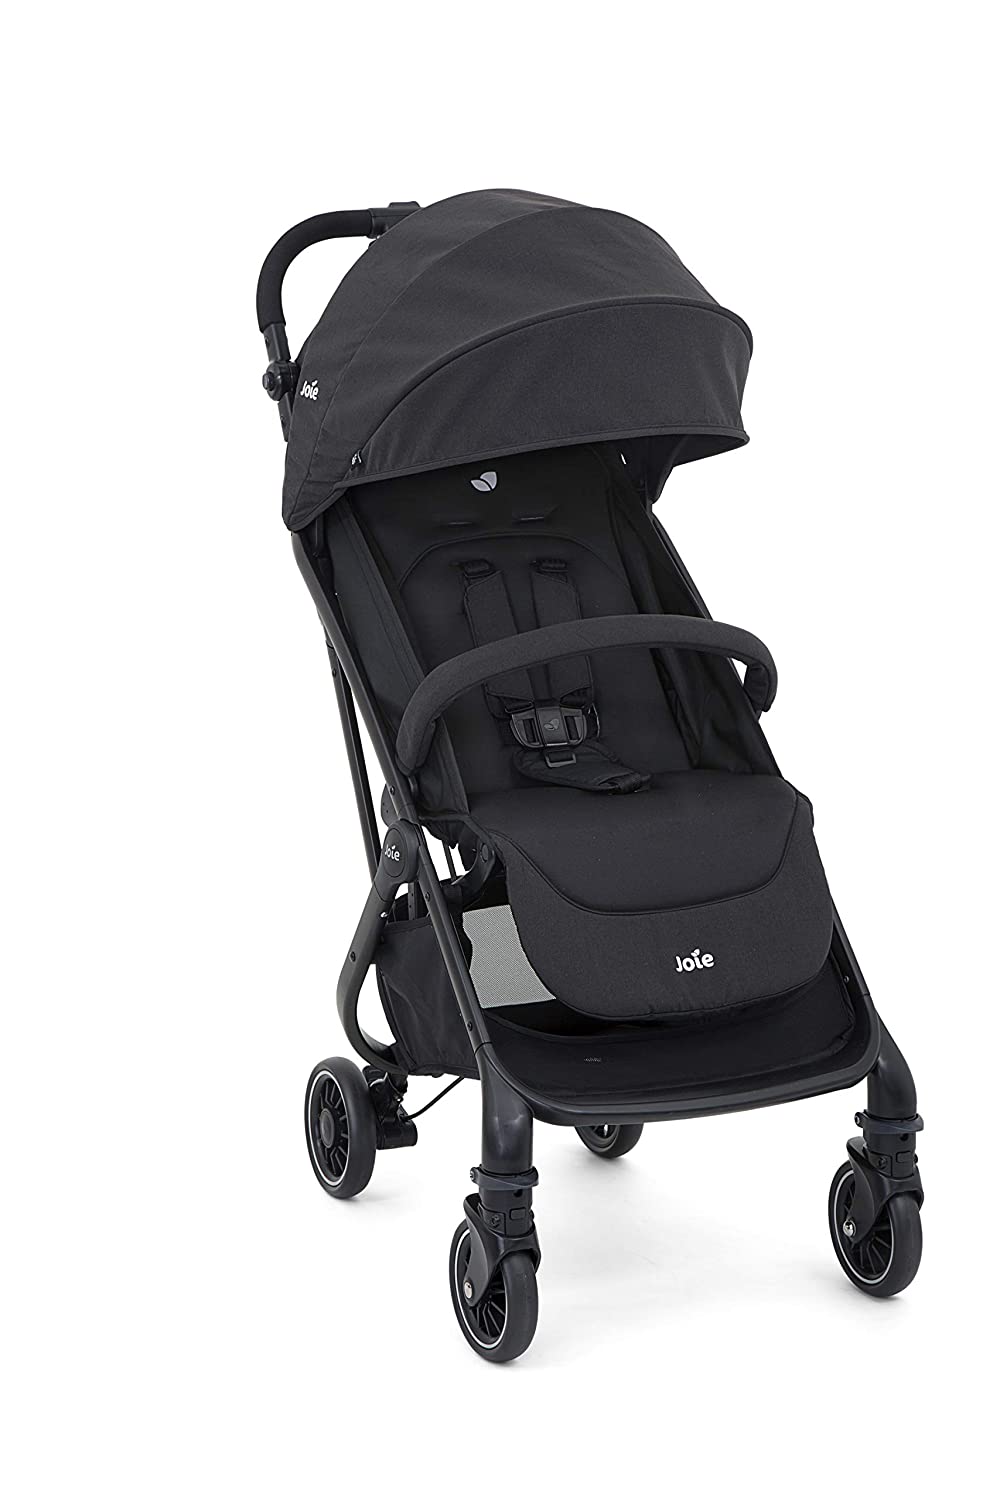 Joie Tourist Buggy with Adaptor Rain Cover Transport Bag Coal